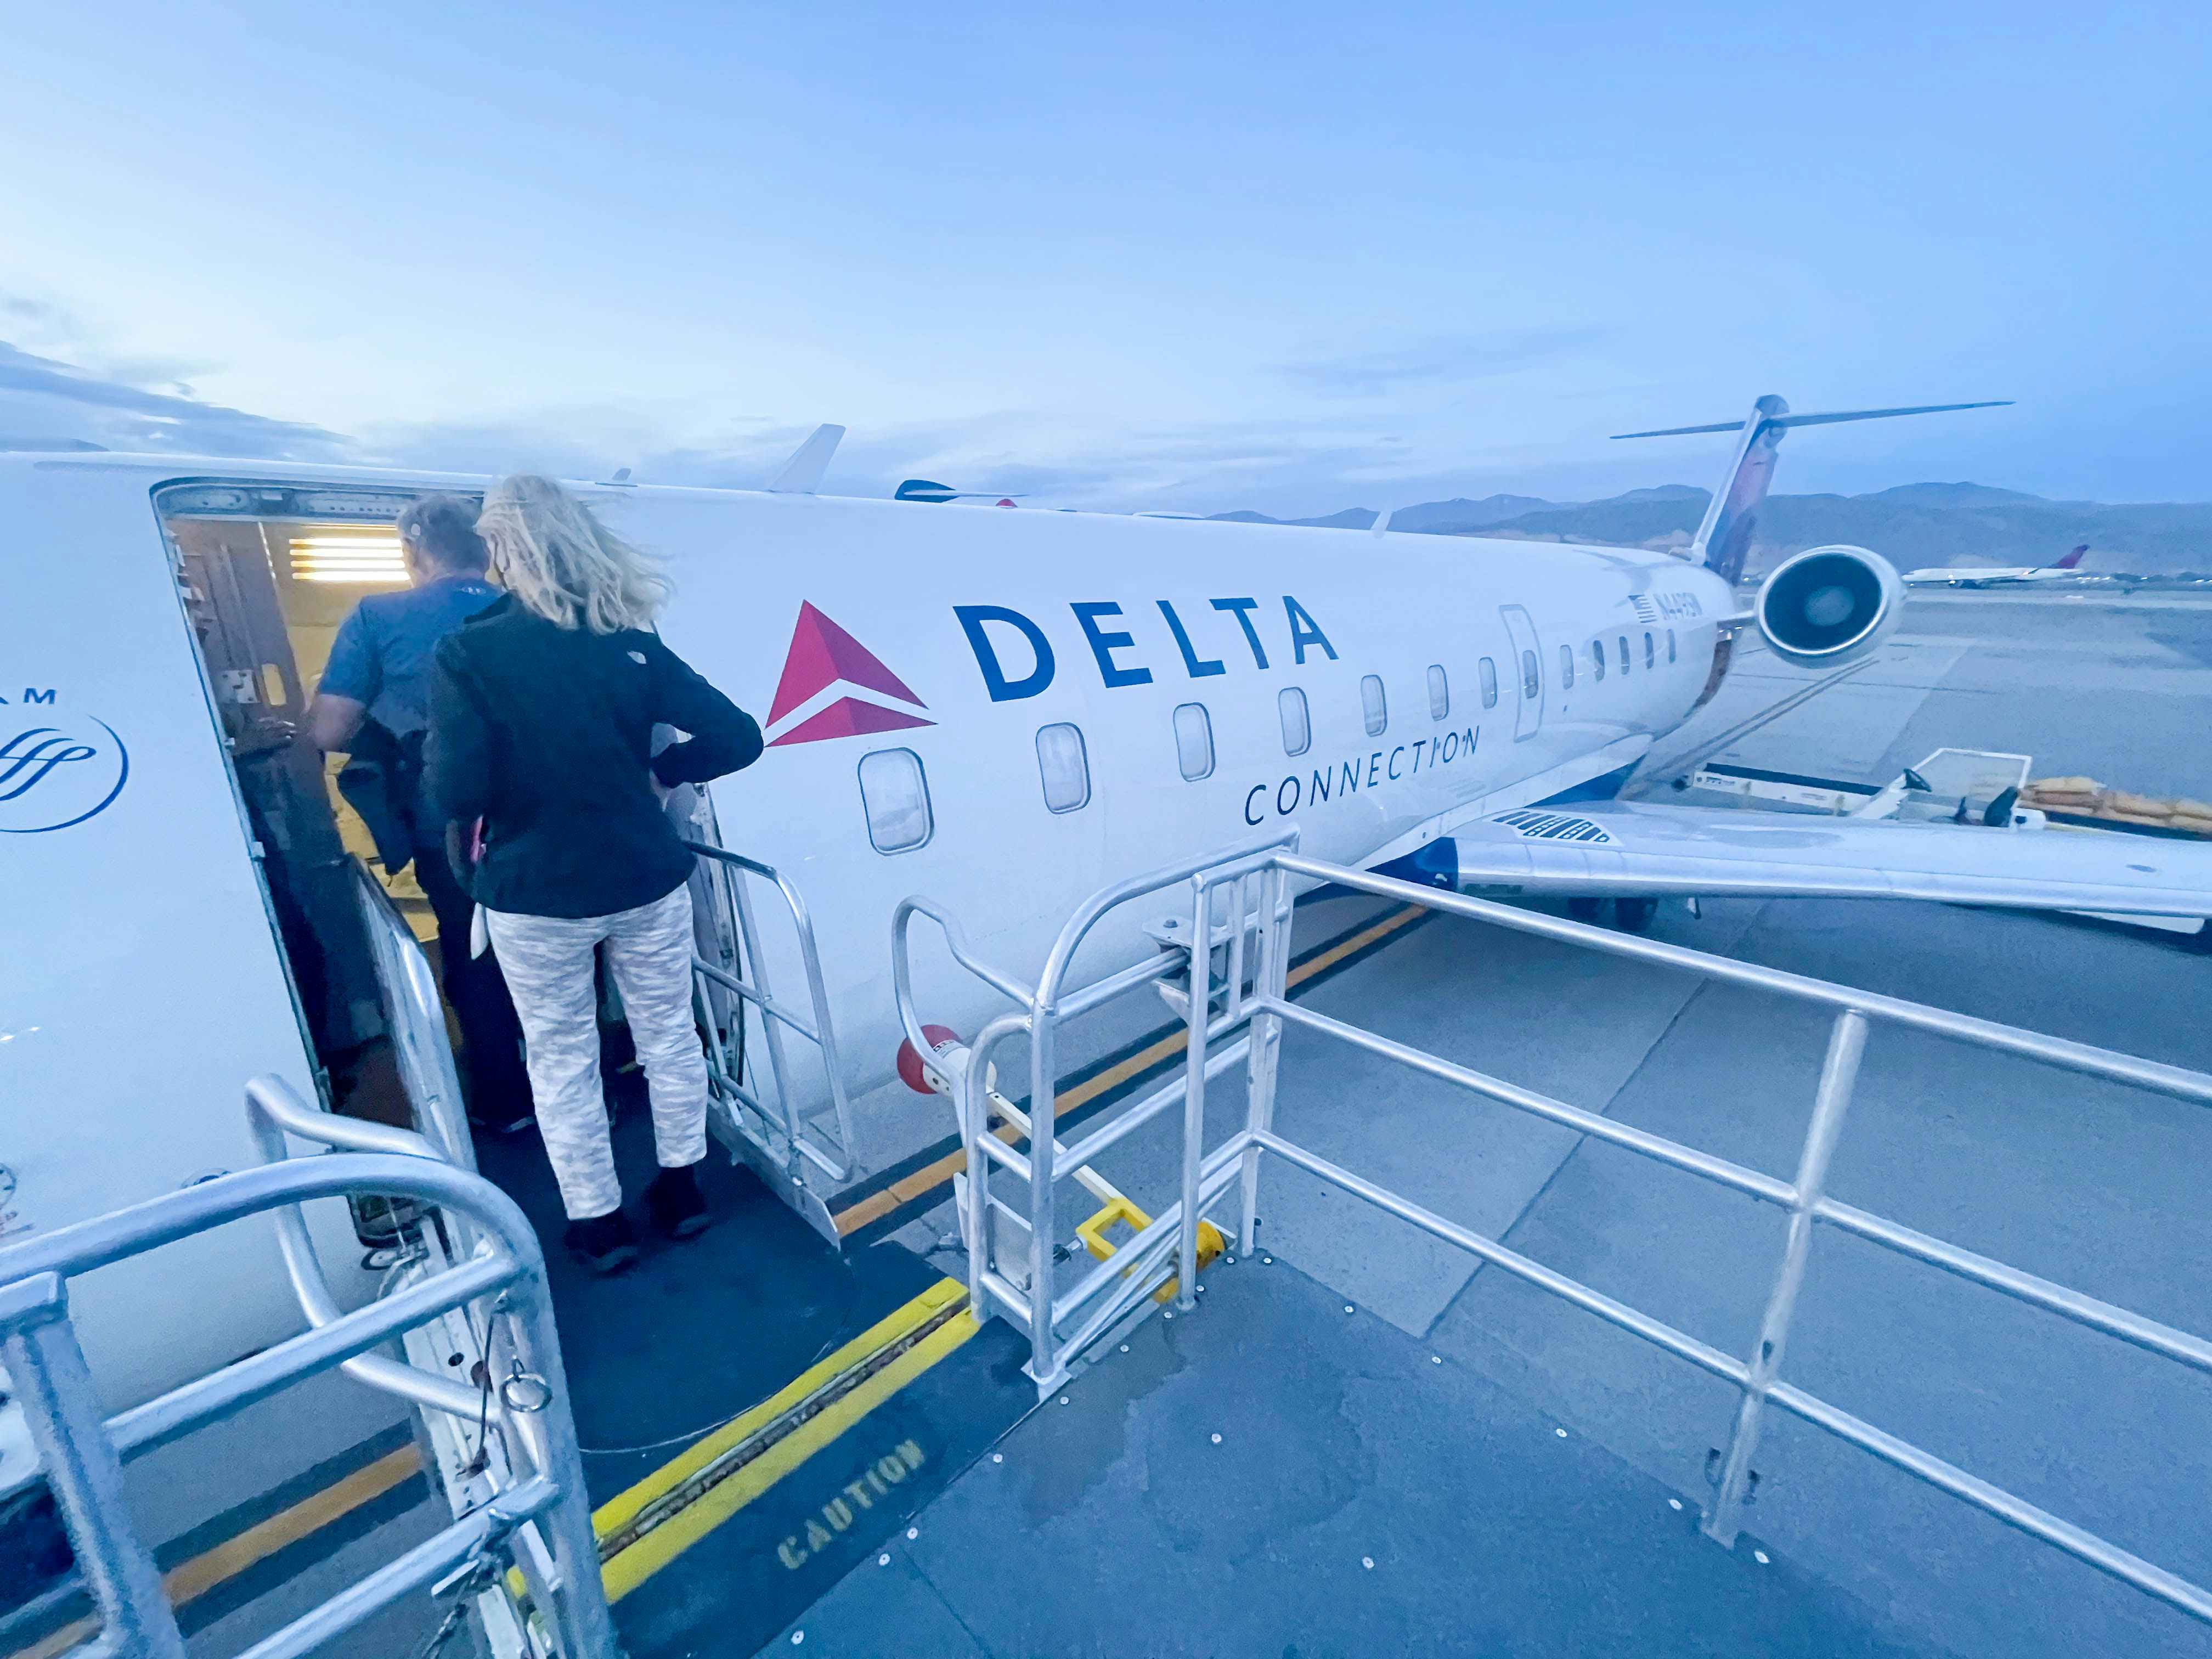 Two people walking onto a small Delta plane on a runway.